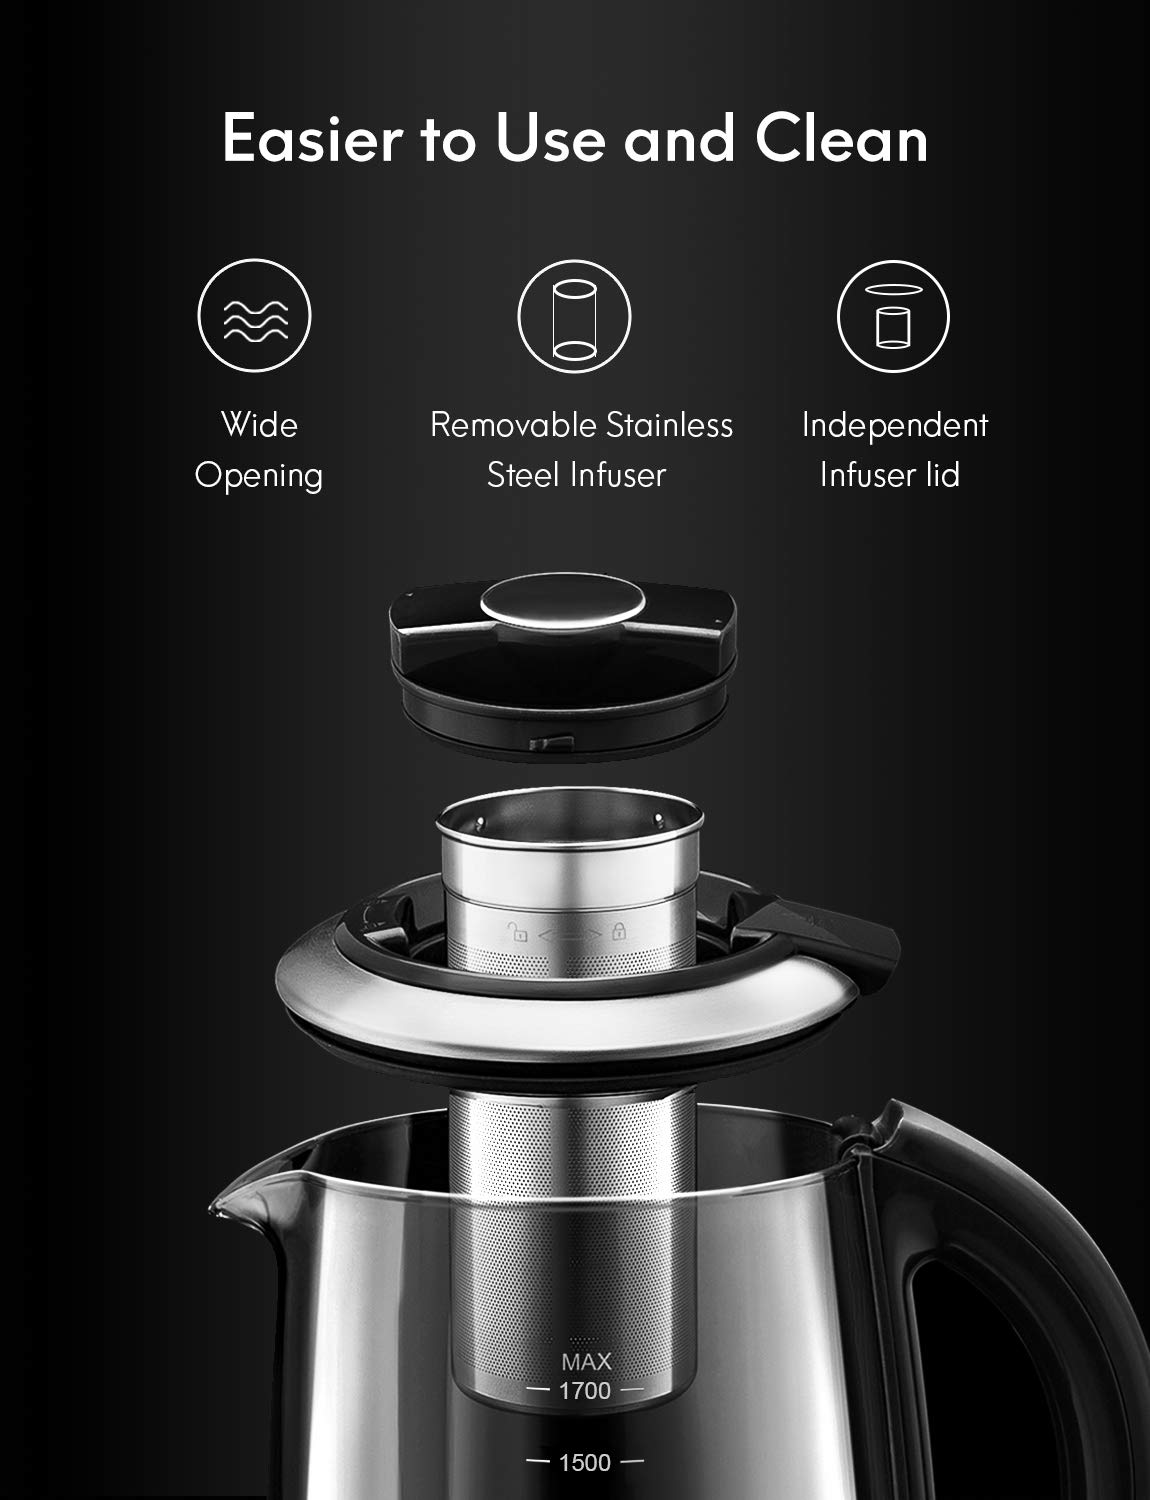 Load image into Gallery viewer, Electric tea kettle 1.7L glass teapot, Smart tea maker with level temperature control, 100% stainless steel inner lid, Heat transfer unit &amp; bottom, Auto off &amp; Anti-boil protection Boiling, BPA free
